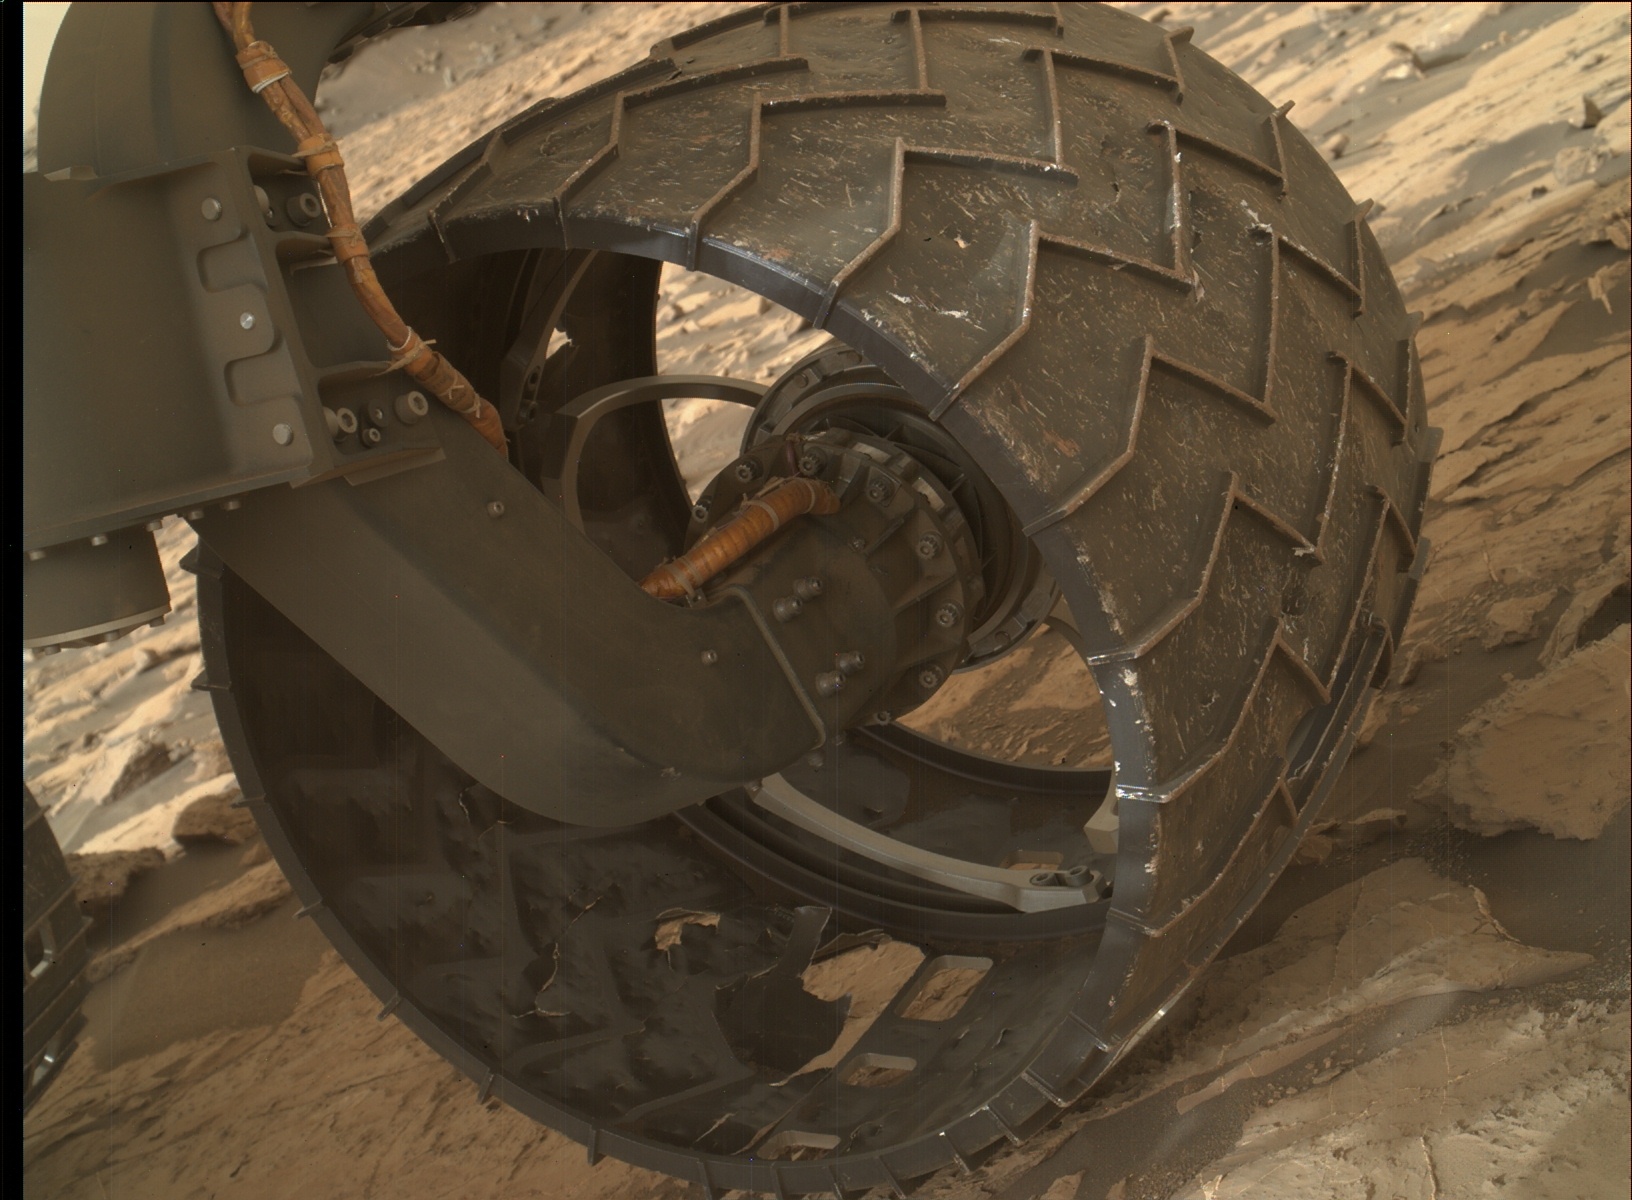 Nasa's Mars rover Curiosity acquired this image using its Mars Hand Lens Imager (MAHLI) on Sol 1444